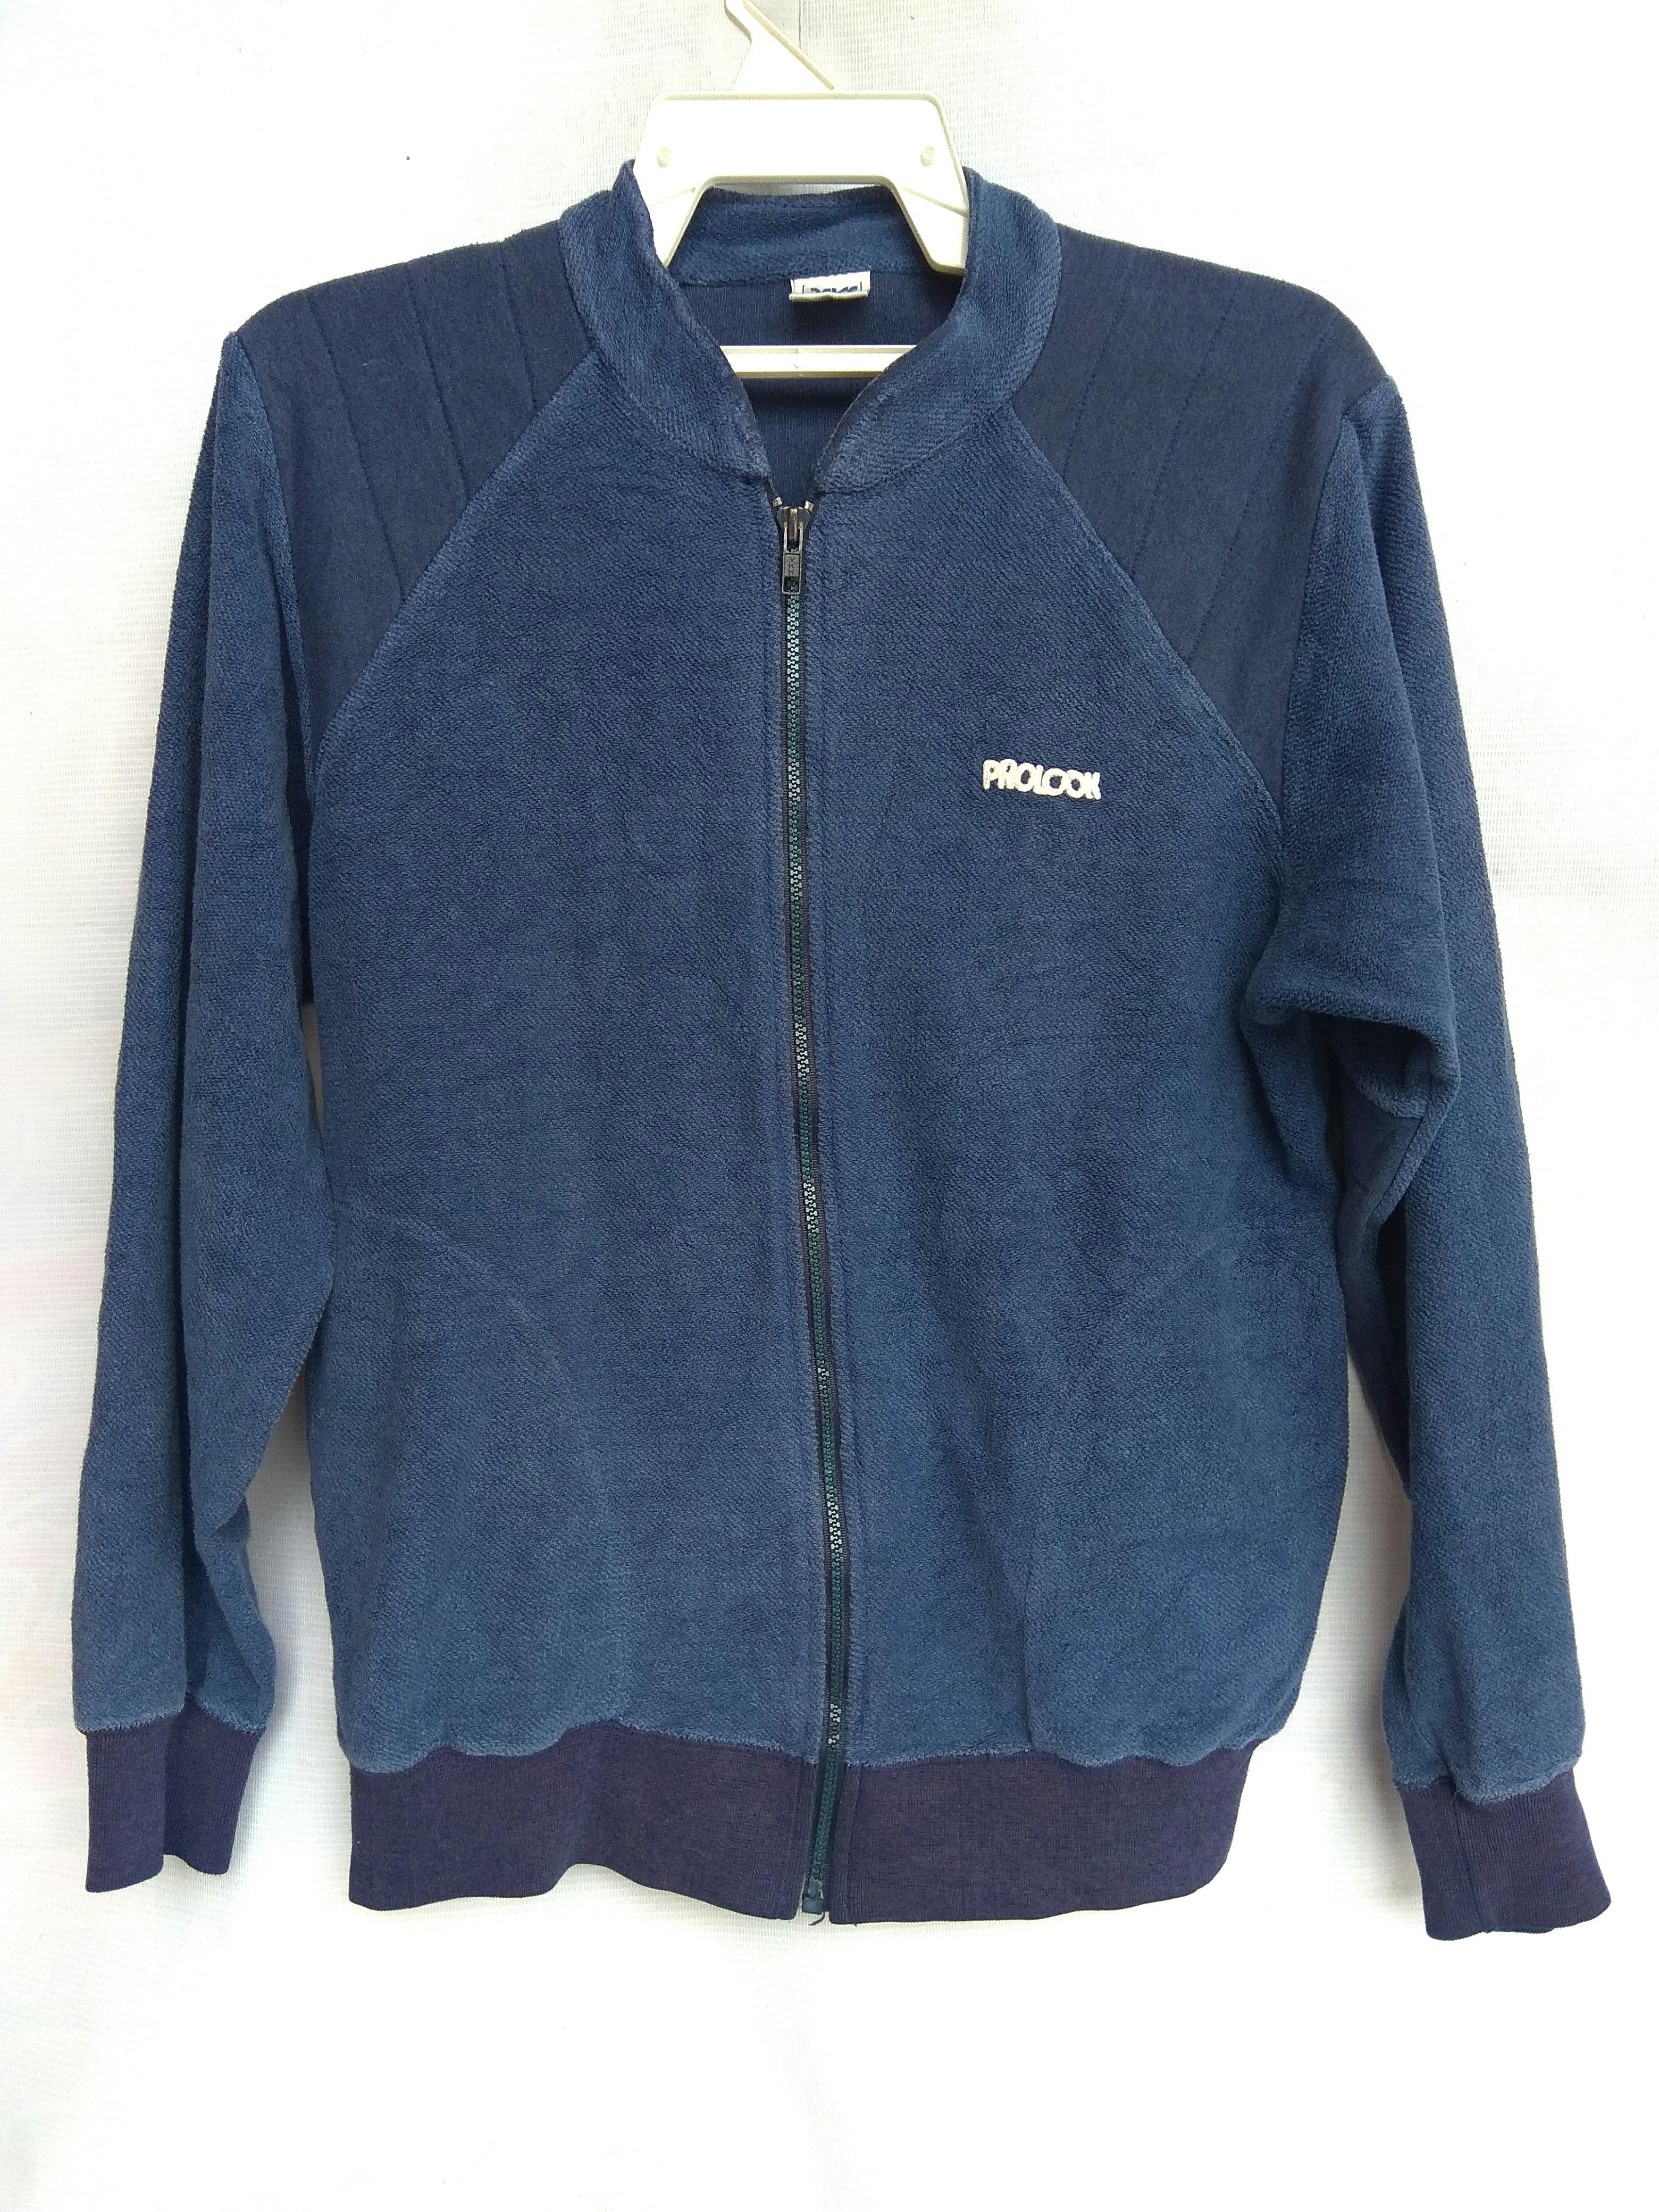 asics prolook blue jacket made in japan - 1